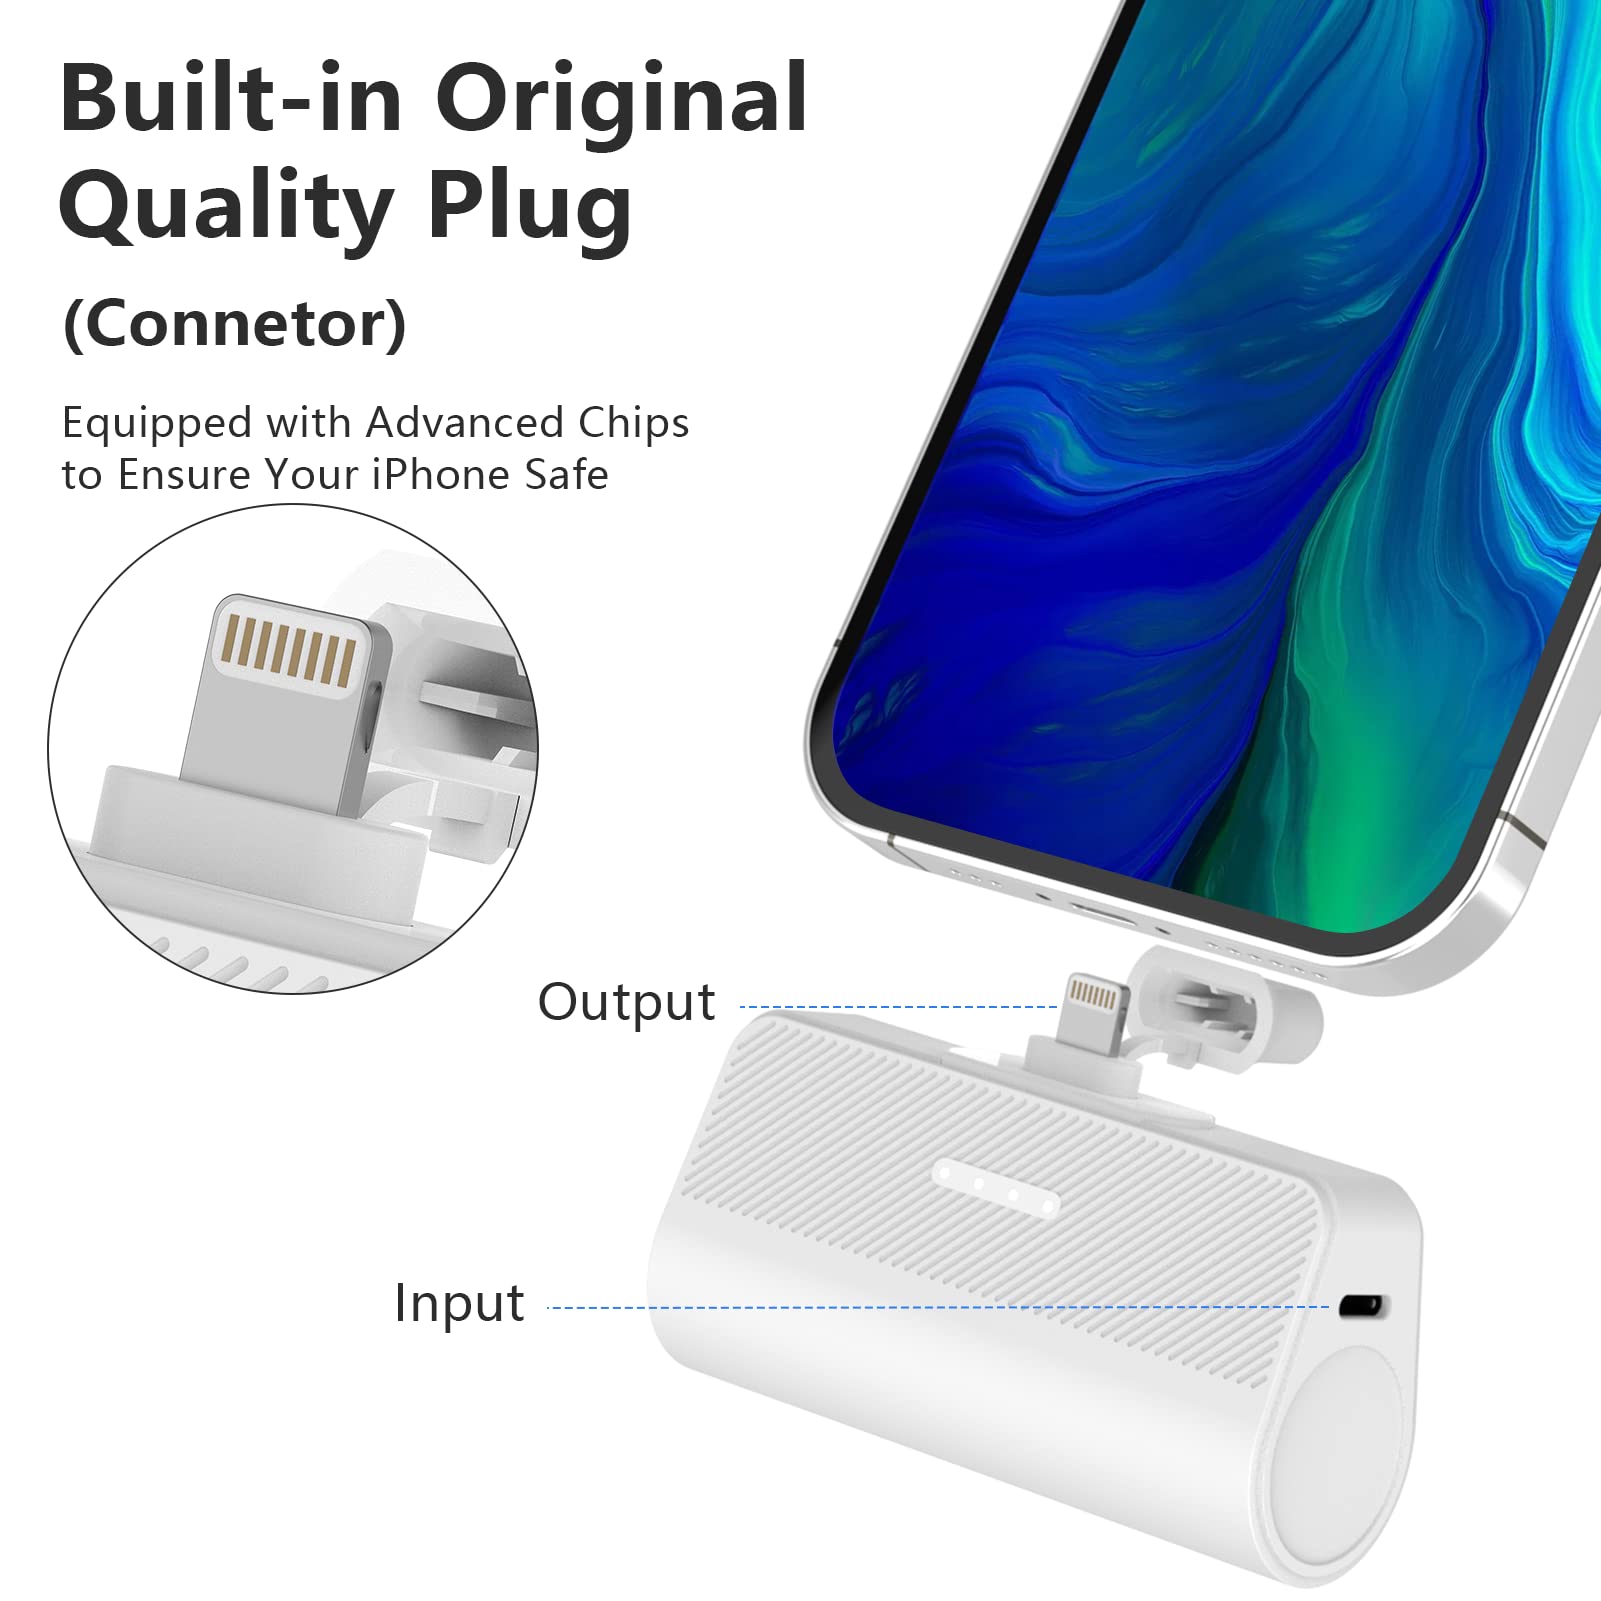 ATGIH Mini Portable Charger for iPhone, 4850mAh Ultra-Compact Small Power Bank Cute Battery Pack Compatible with iPhone 14/14 Pro Max/13/13 Pro Max/12/12 Pro Max/11 Pro/XS Max/XR/X/8/7/6/Plus/Airpods